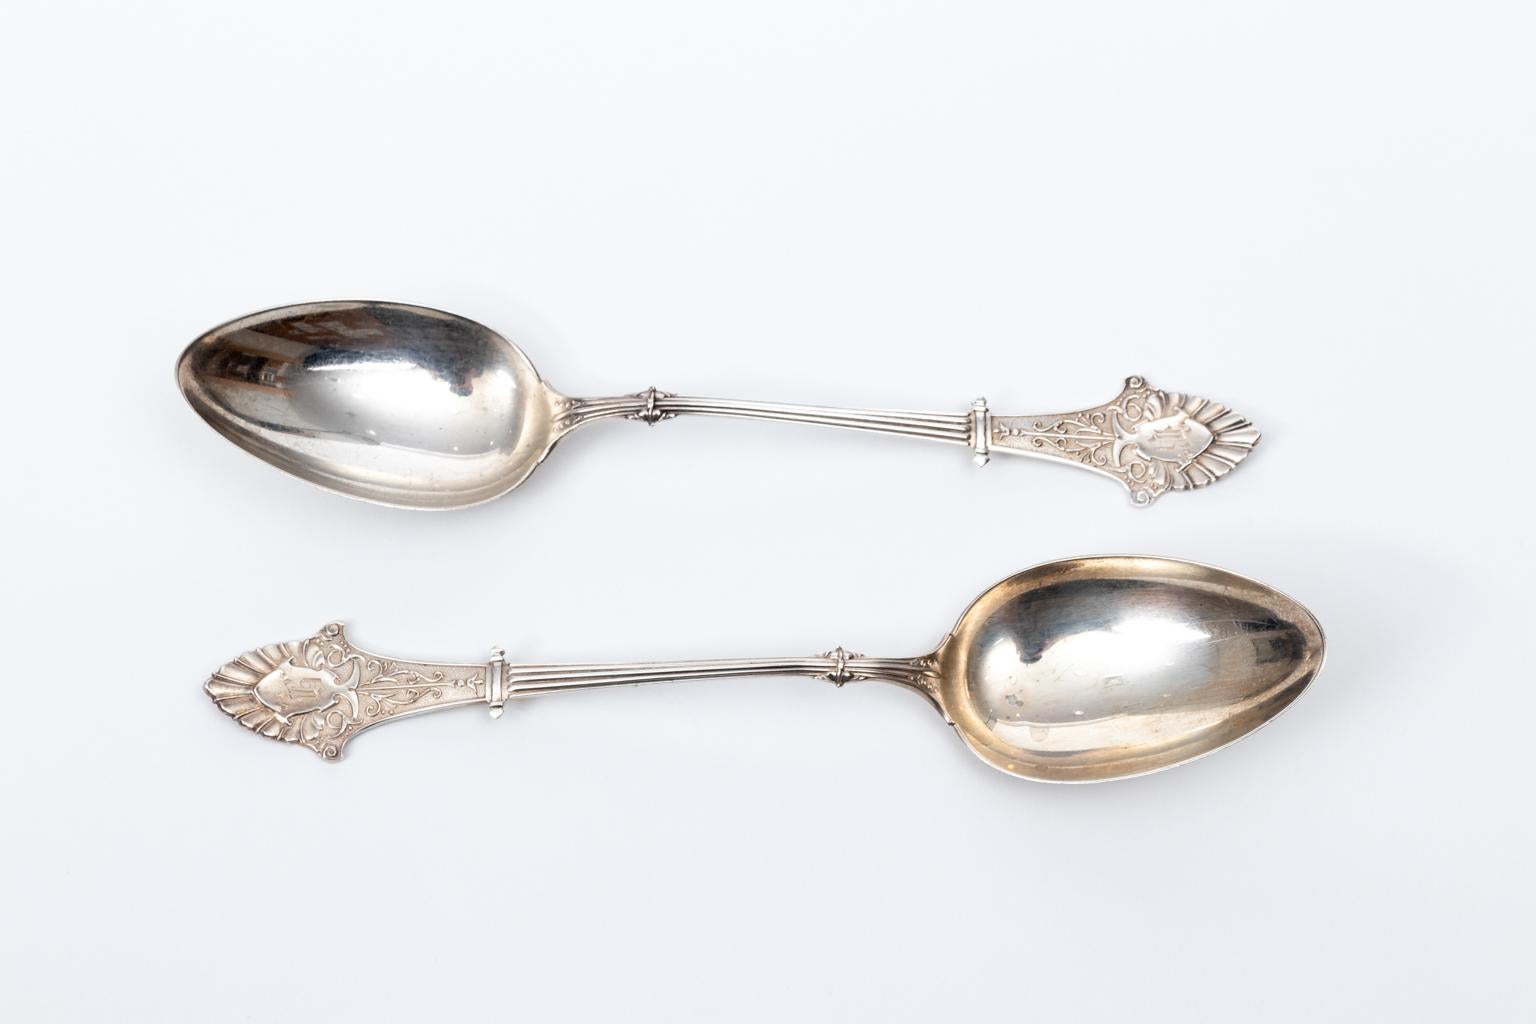 Pair of 19th century Gorham Corinthian sterling silver serving spoons. They weigh 106.6 grams. Made in the United States. Please note of wear consistent with age.